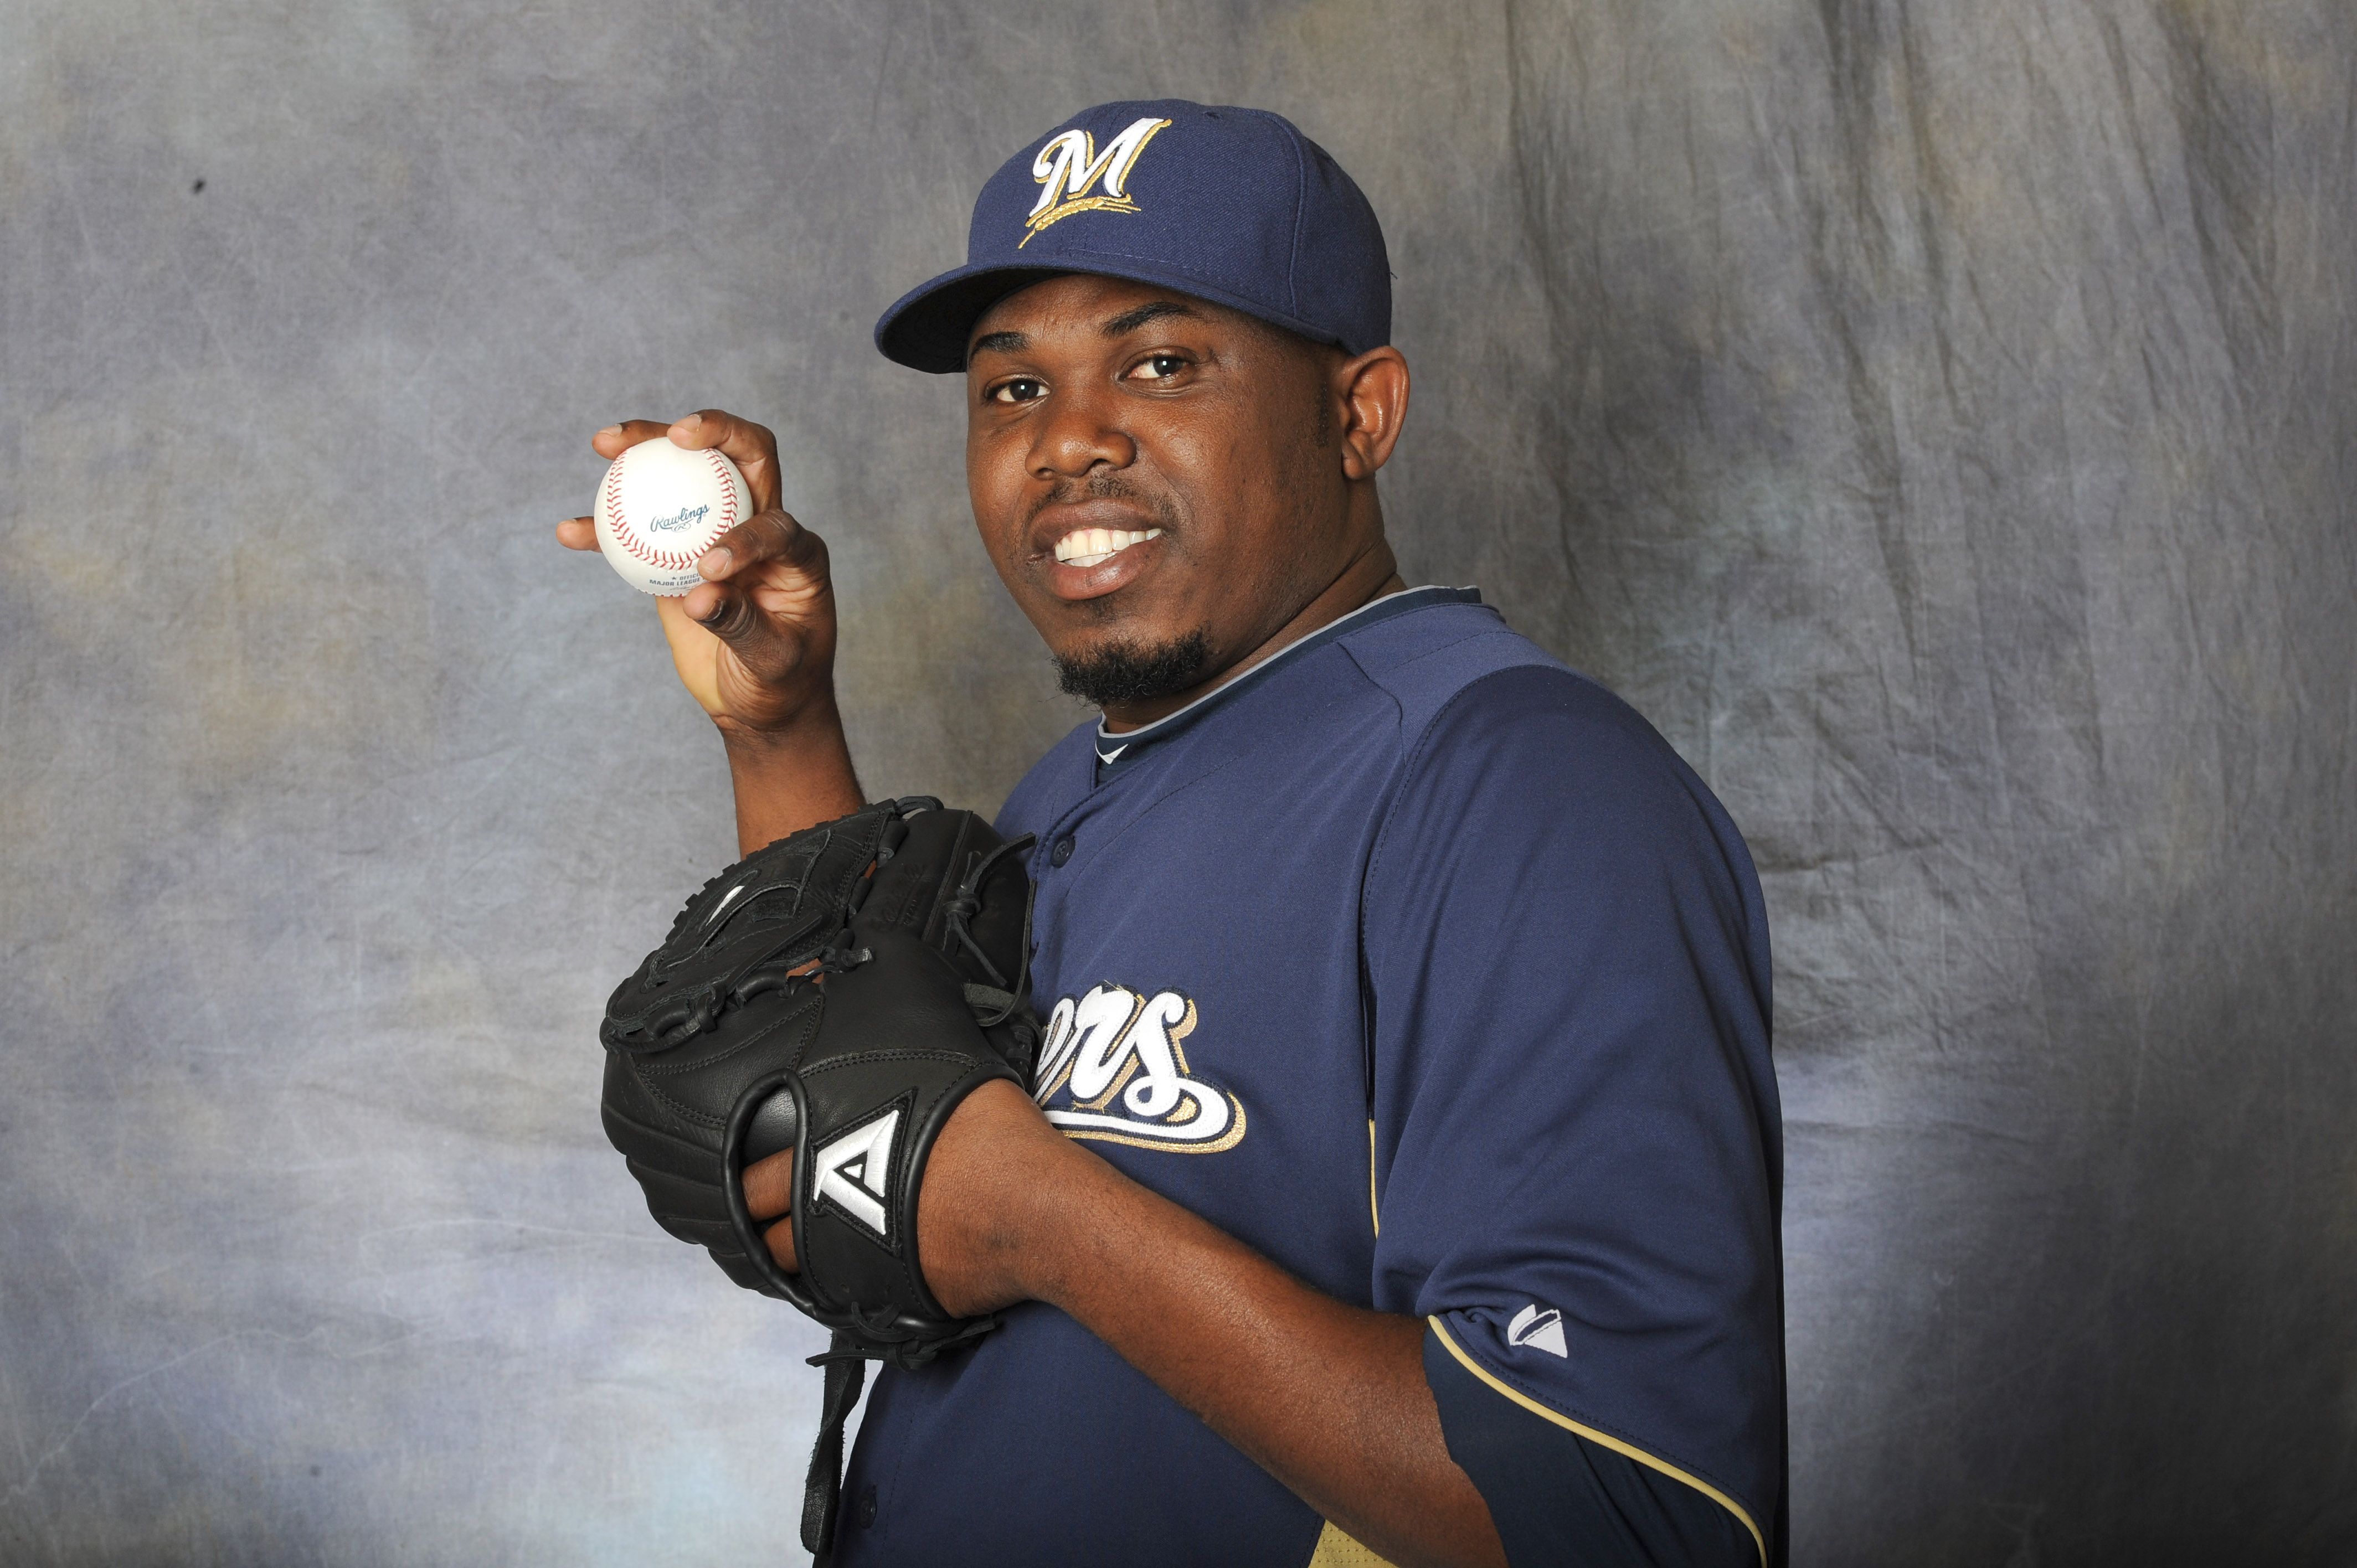 Frankie De La Cruz #63 of the Milwaukee Brewers posed for a portrait at a photo day at Maryvale Baseball Park on February 26, 2012 | Photo: Getty Images